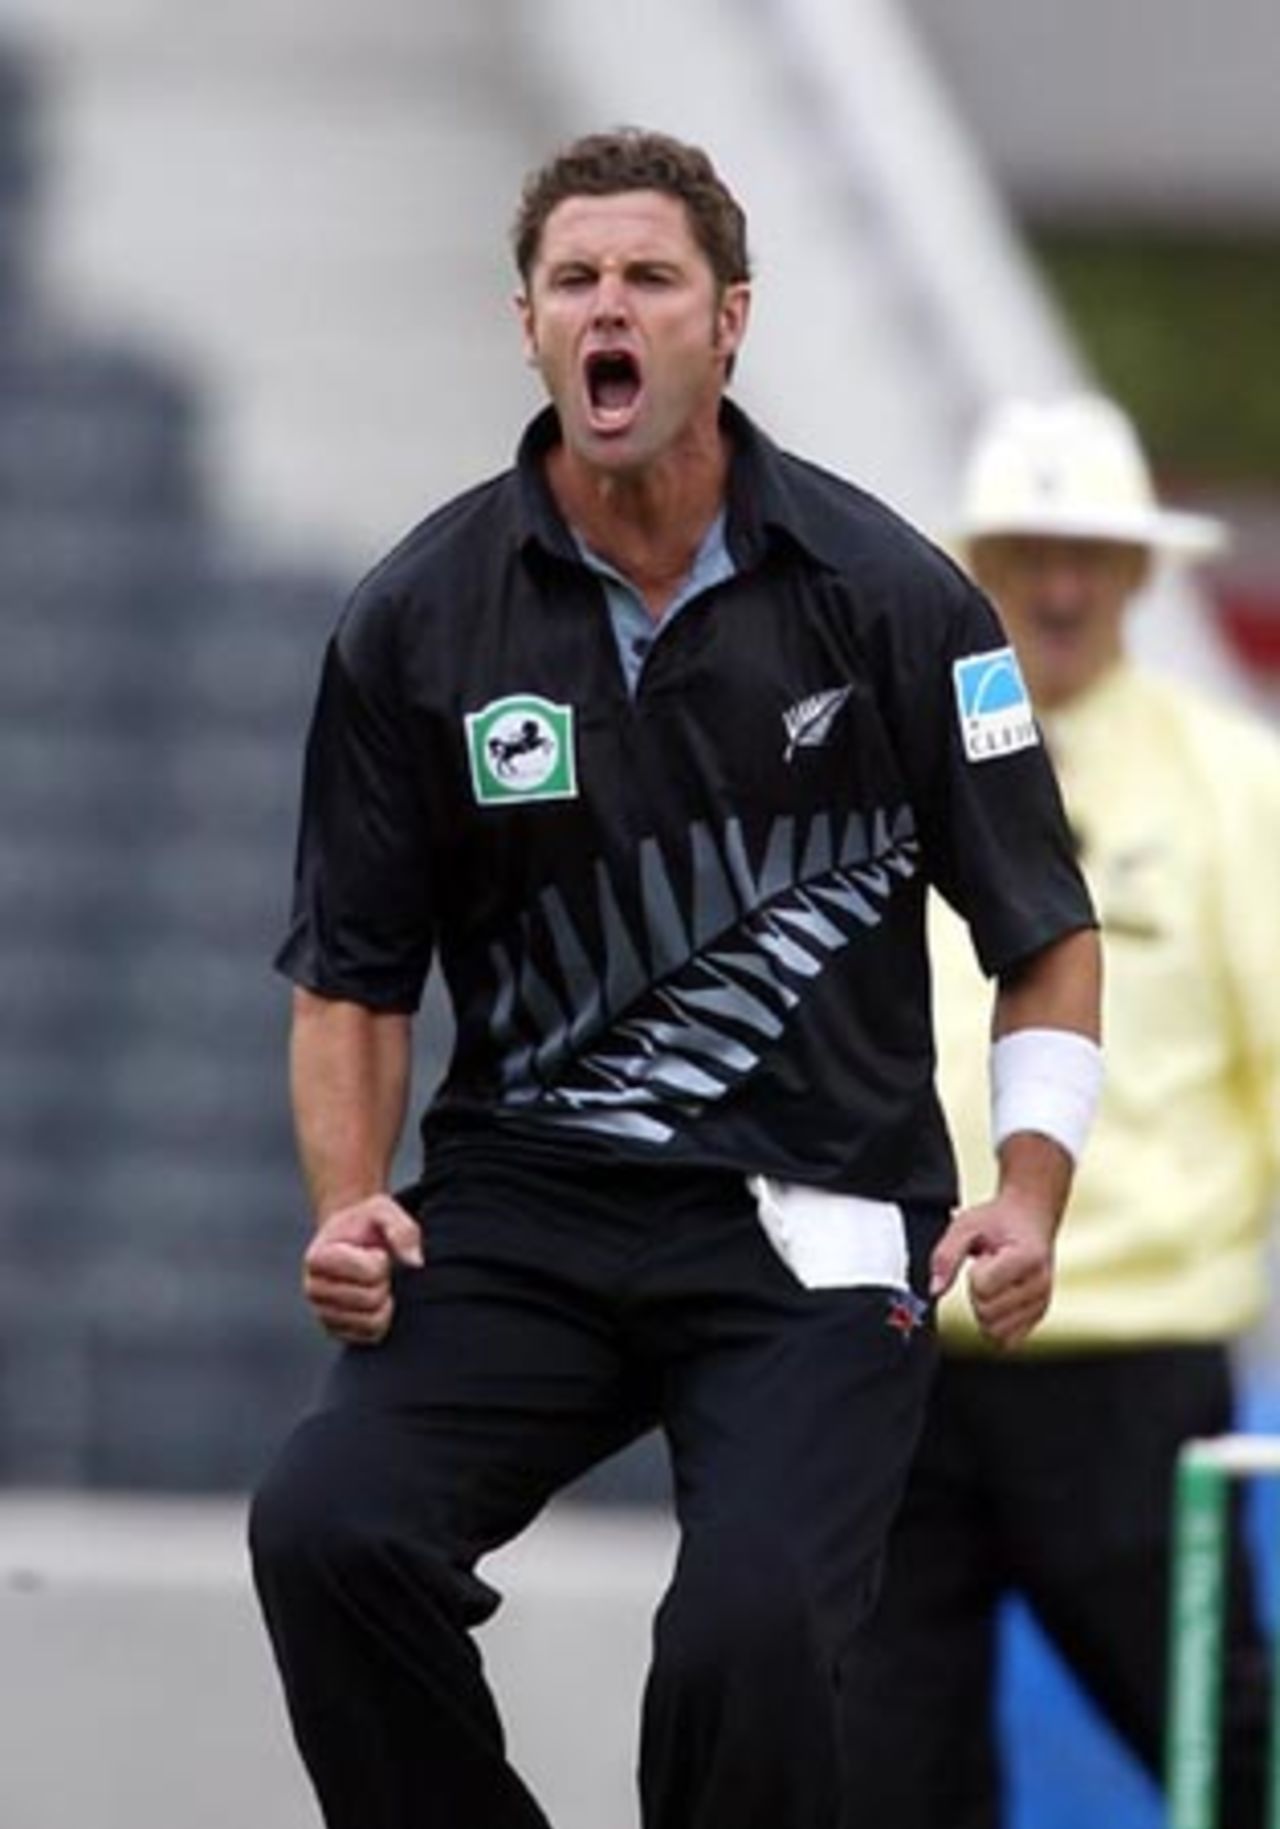 New Zealand bowler Chris Cairns shouts in frustration as wicket-keeper Chris Nevin drops England batsman Nick Knight off his bowling during his spell of 2-43 from nine overs. Umpire Evan Watkin looks on in the background. 1st ODI: New Zealand v England at Jade Stadium, Christchurch, 13 February 2002.